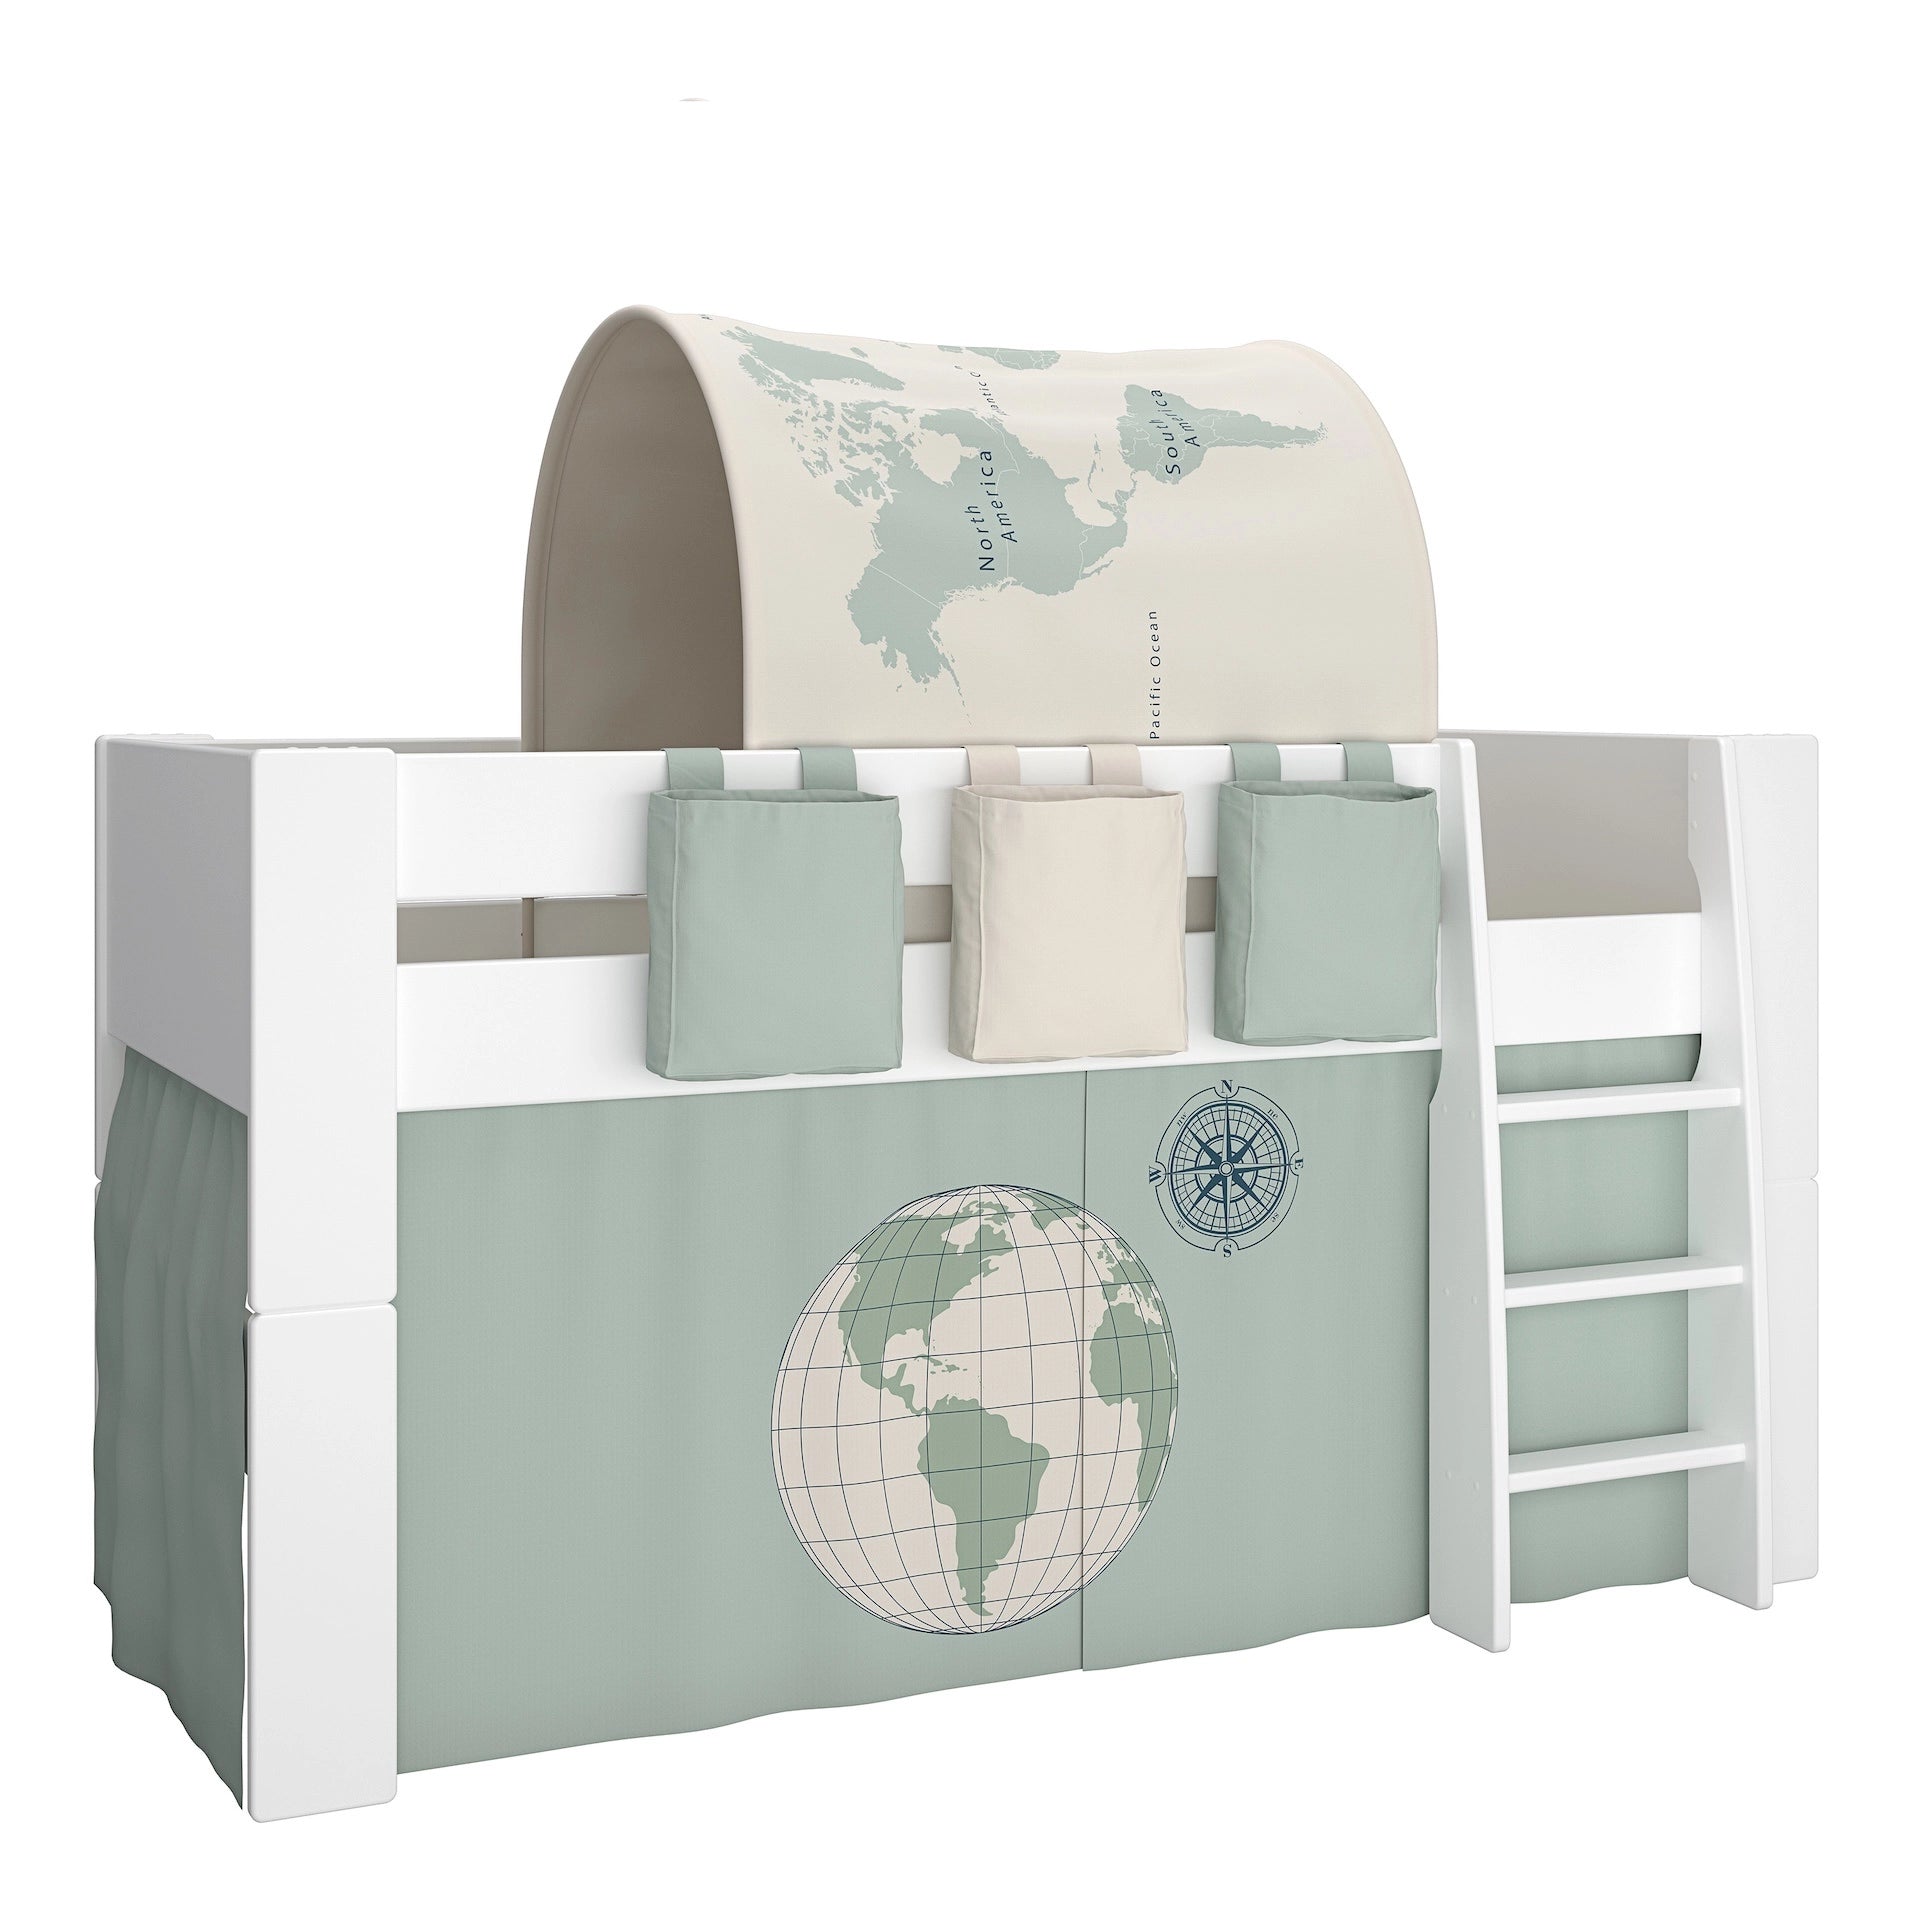 Furniture To Go Steens For Kids Mid Sleeper in Folkestone Grey, Includes - World Tent + Tunnel + 2 Pockets in Green + 1 Pocket in Sand